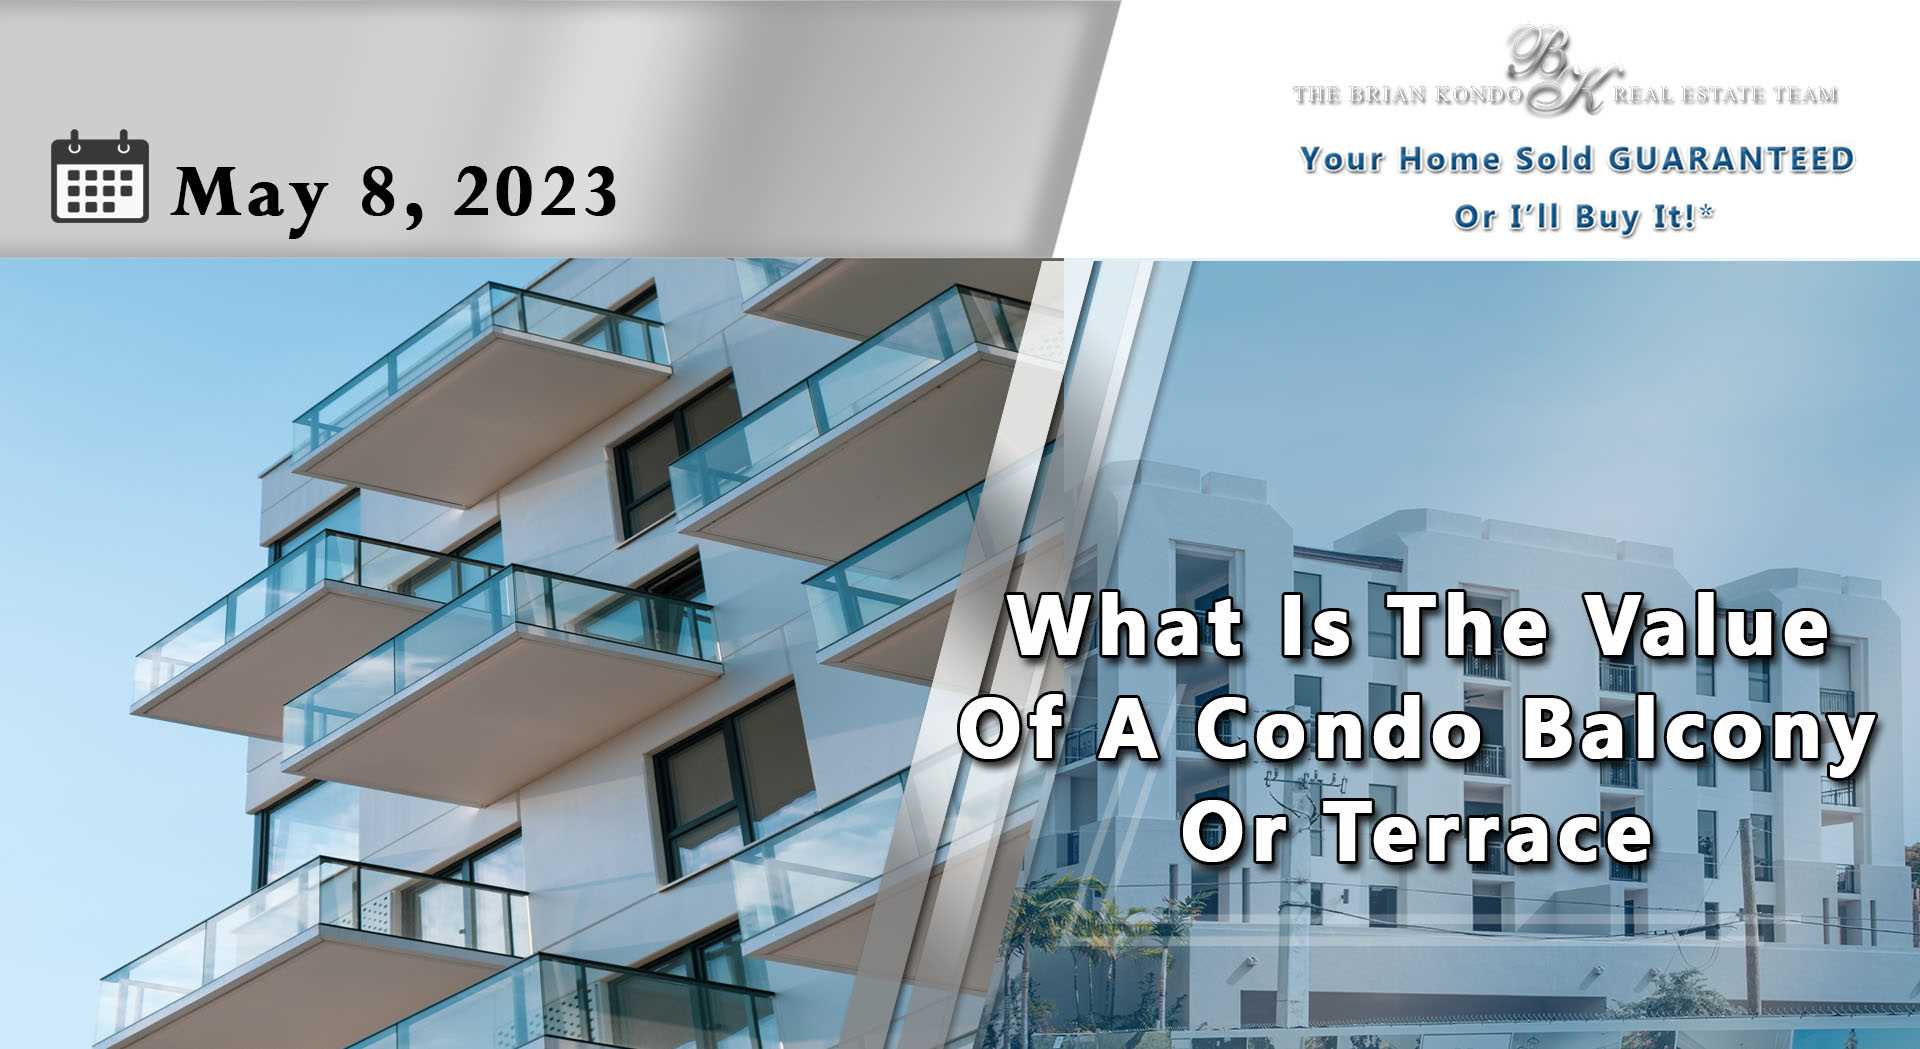 What Is The Value Of A Condominium Balcony Or Terrace?